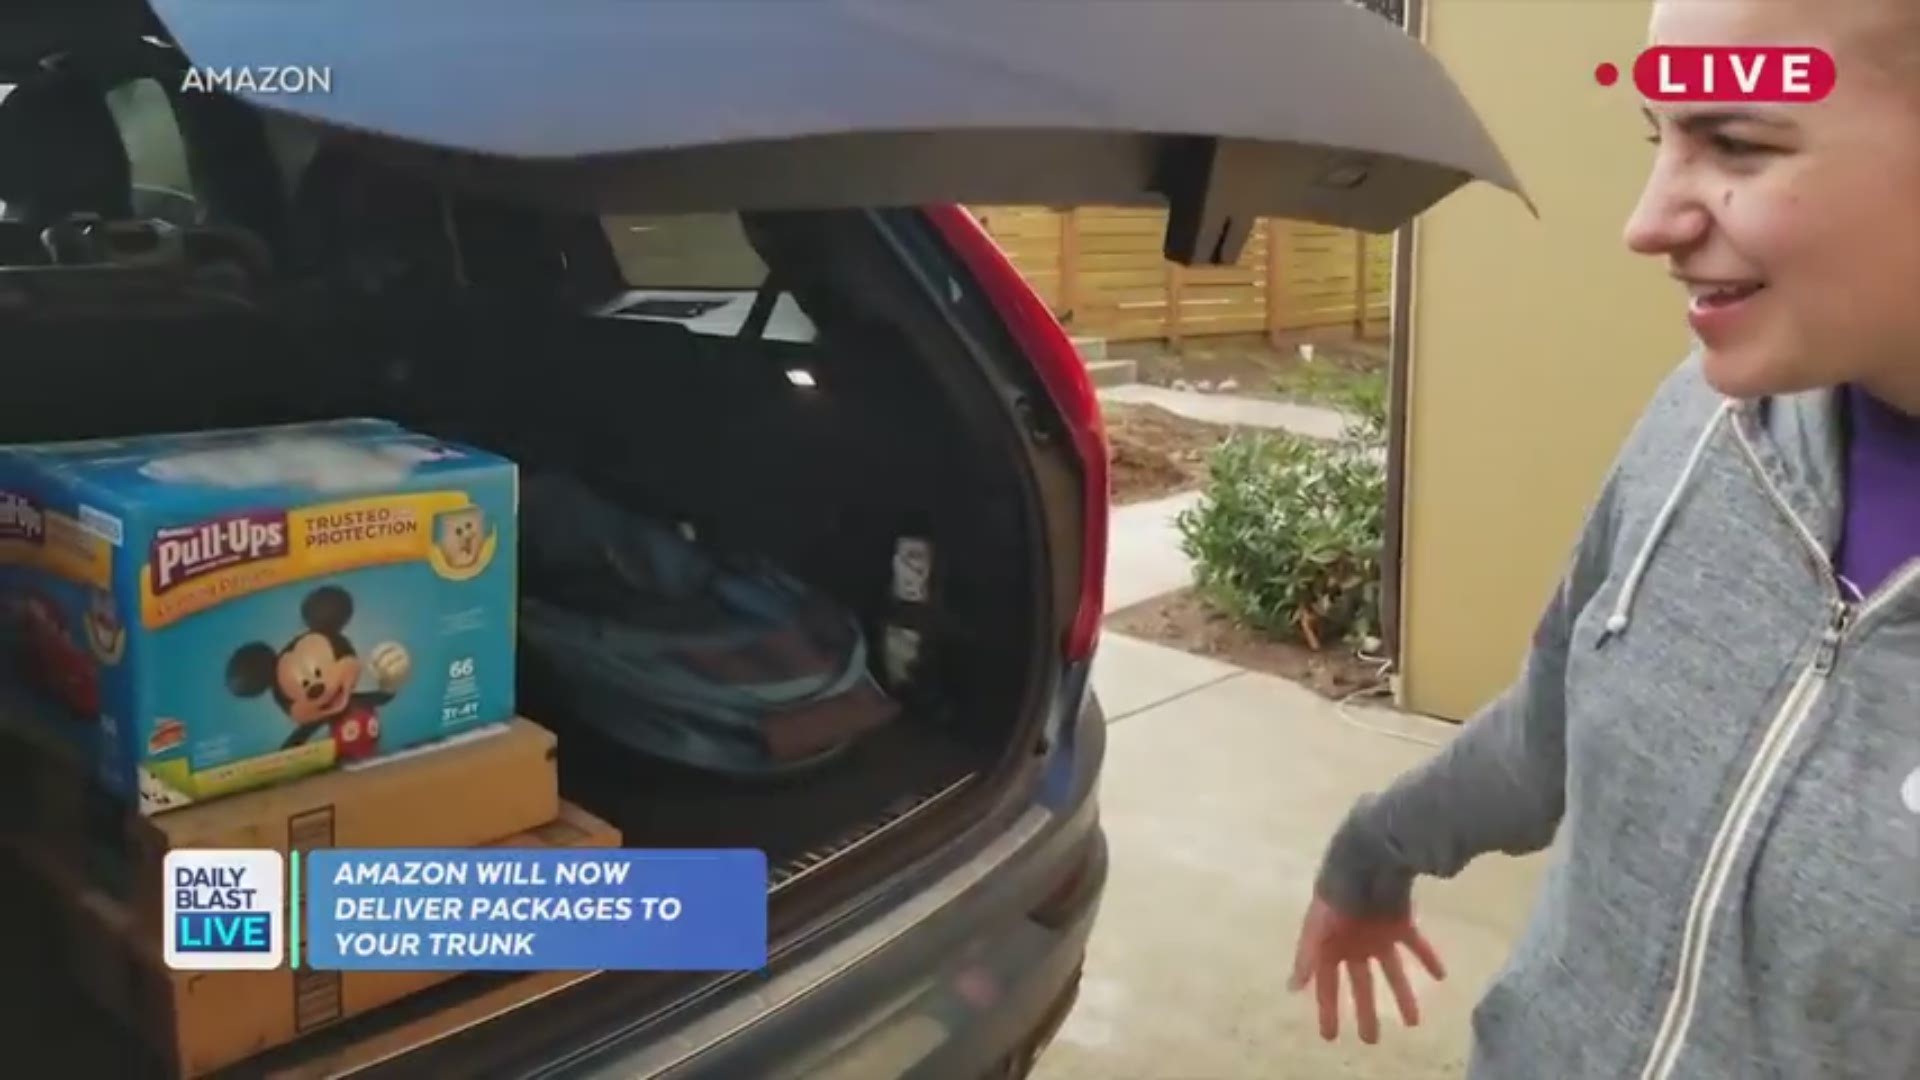 Couriers for Amazon are making a new service available for it's users. They'll deliver directly to your car.